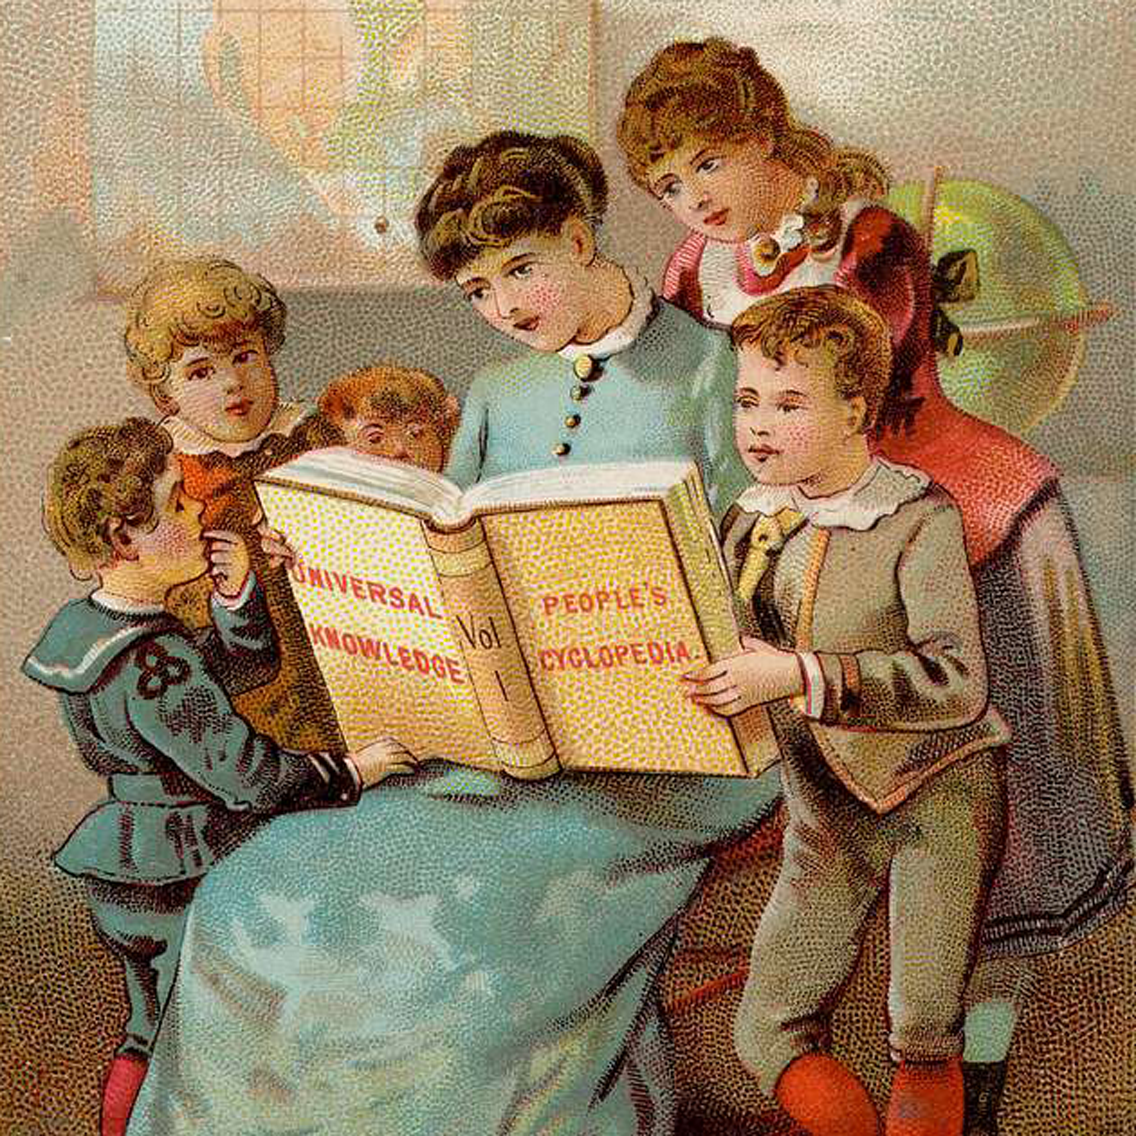 Vintage illustration of a family around a cyclopedia